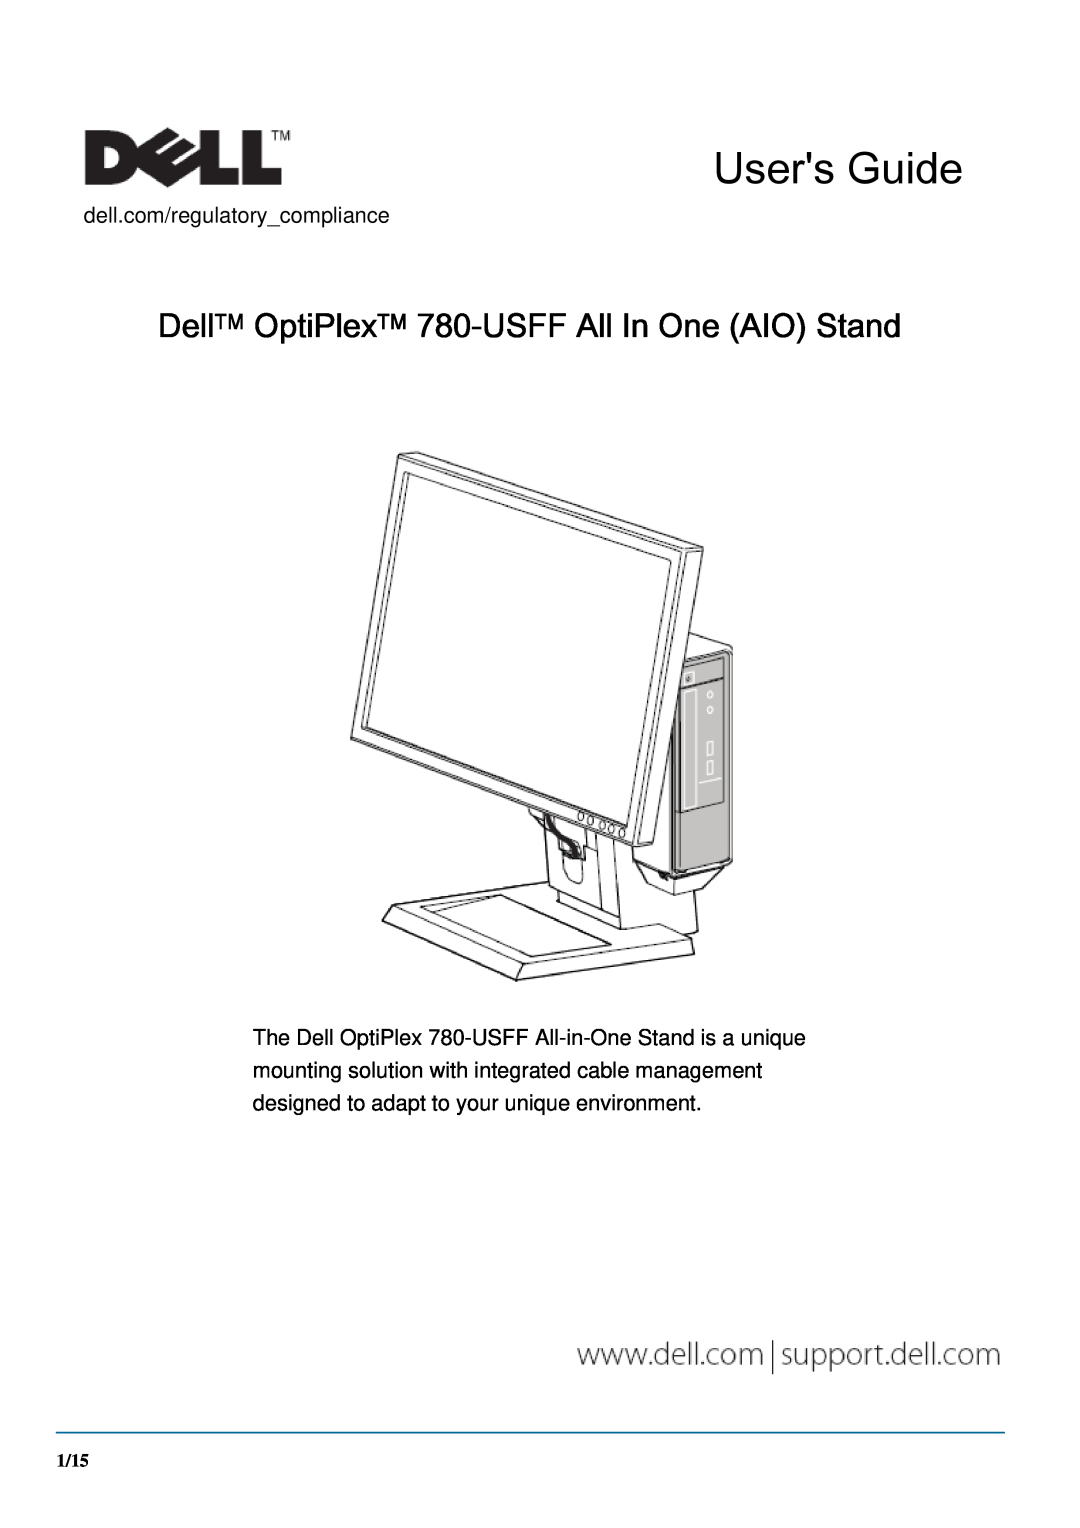 Dell manual DellTM OptiPlexTM 780-USFF All In One AIO Stand, dell.com/regulatorycompliance, Users Guide, 1/15 